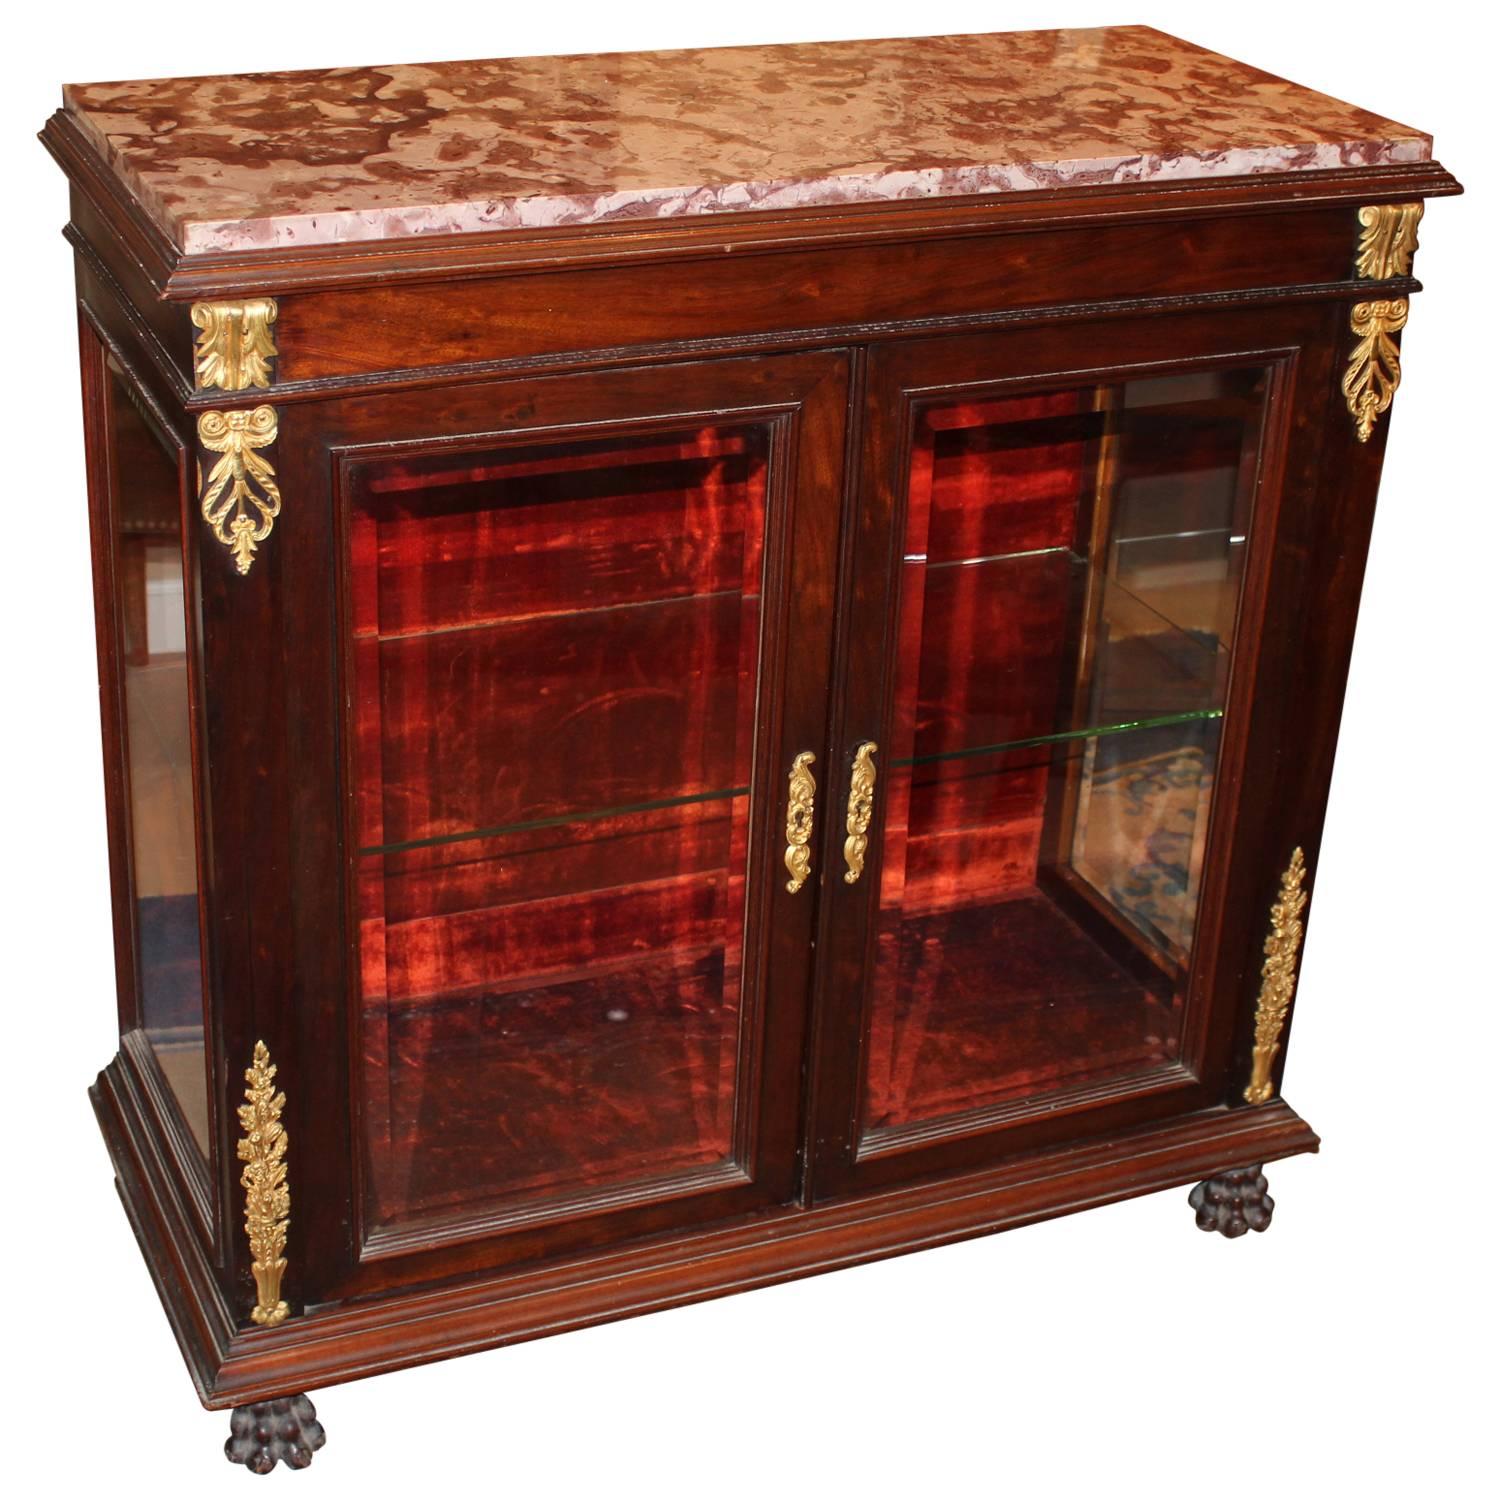 French Empire Style Curio Cabinet or Vitrine with Rouge Marble Top